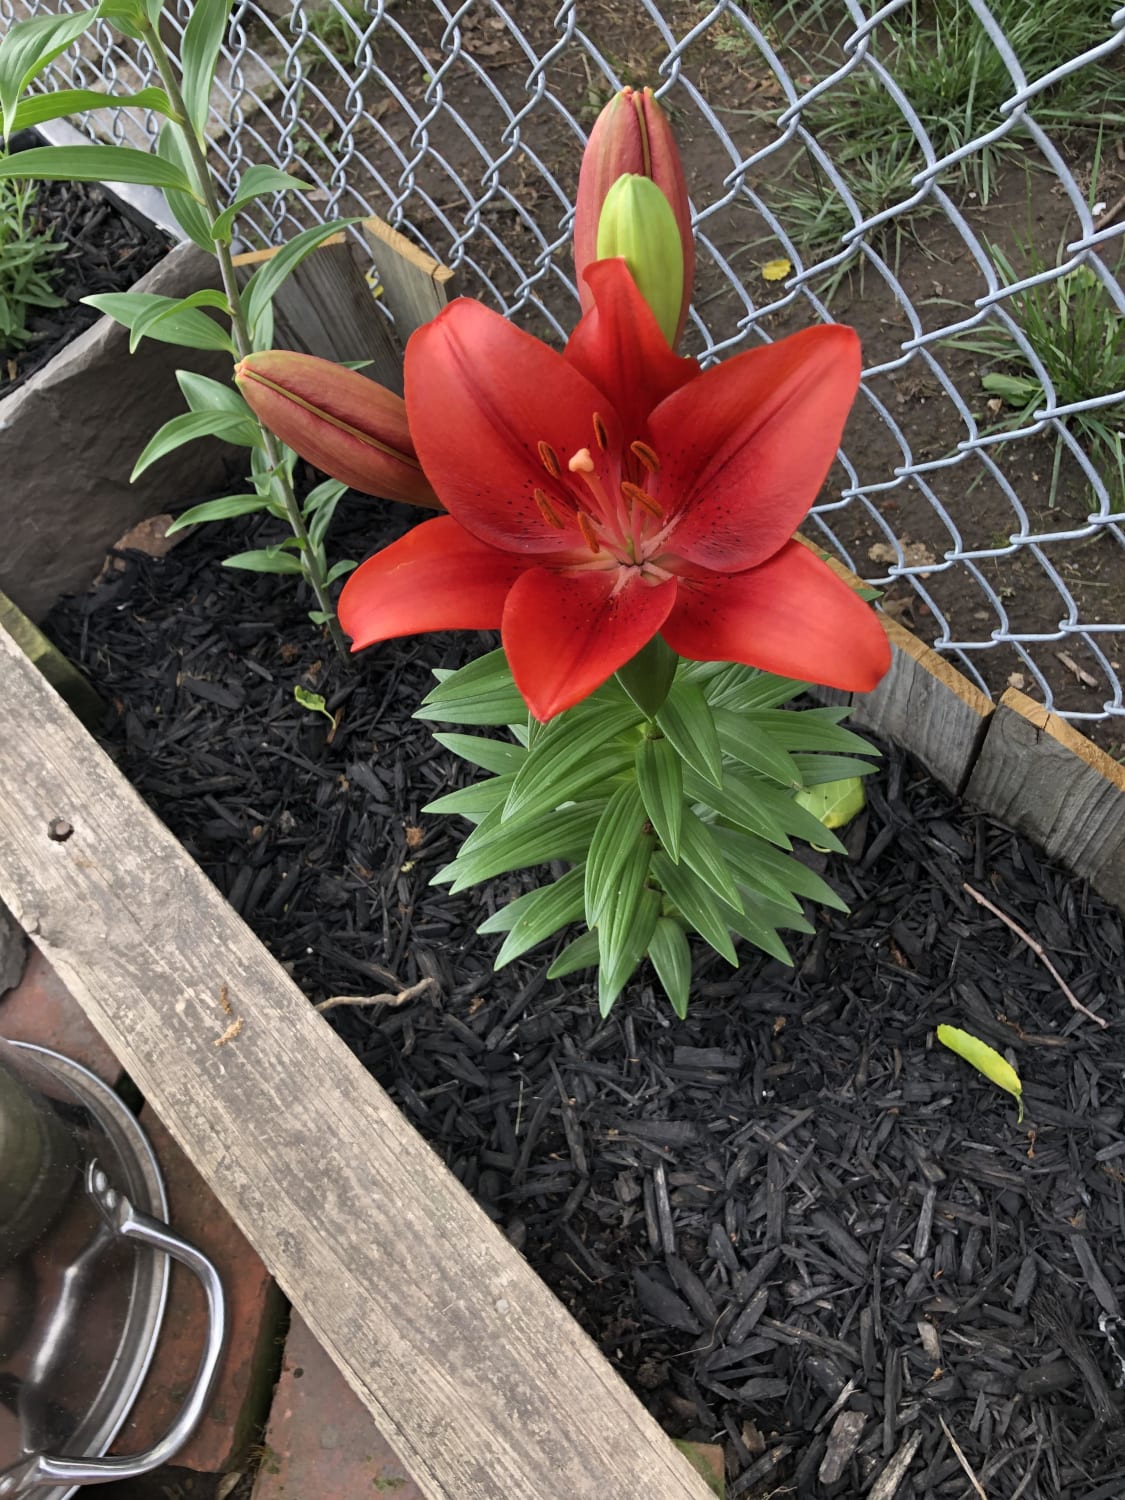 My first ever Lily bloomed today 😊